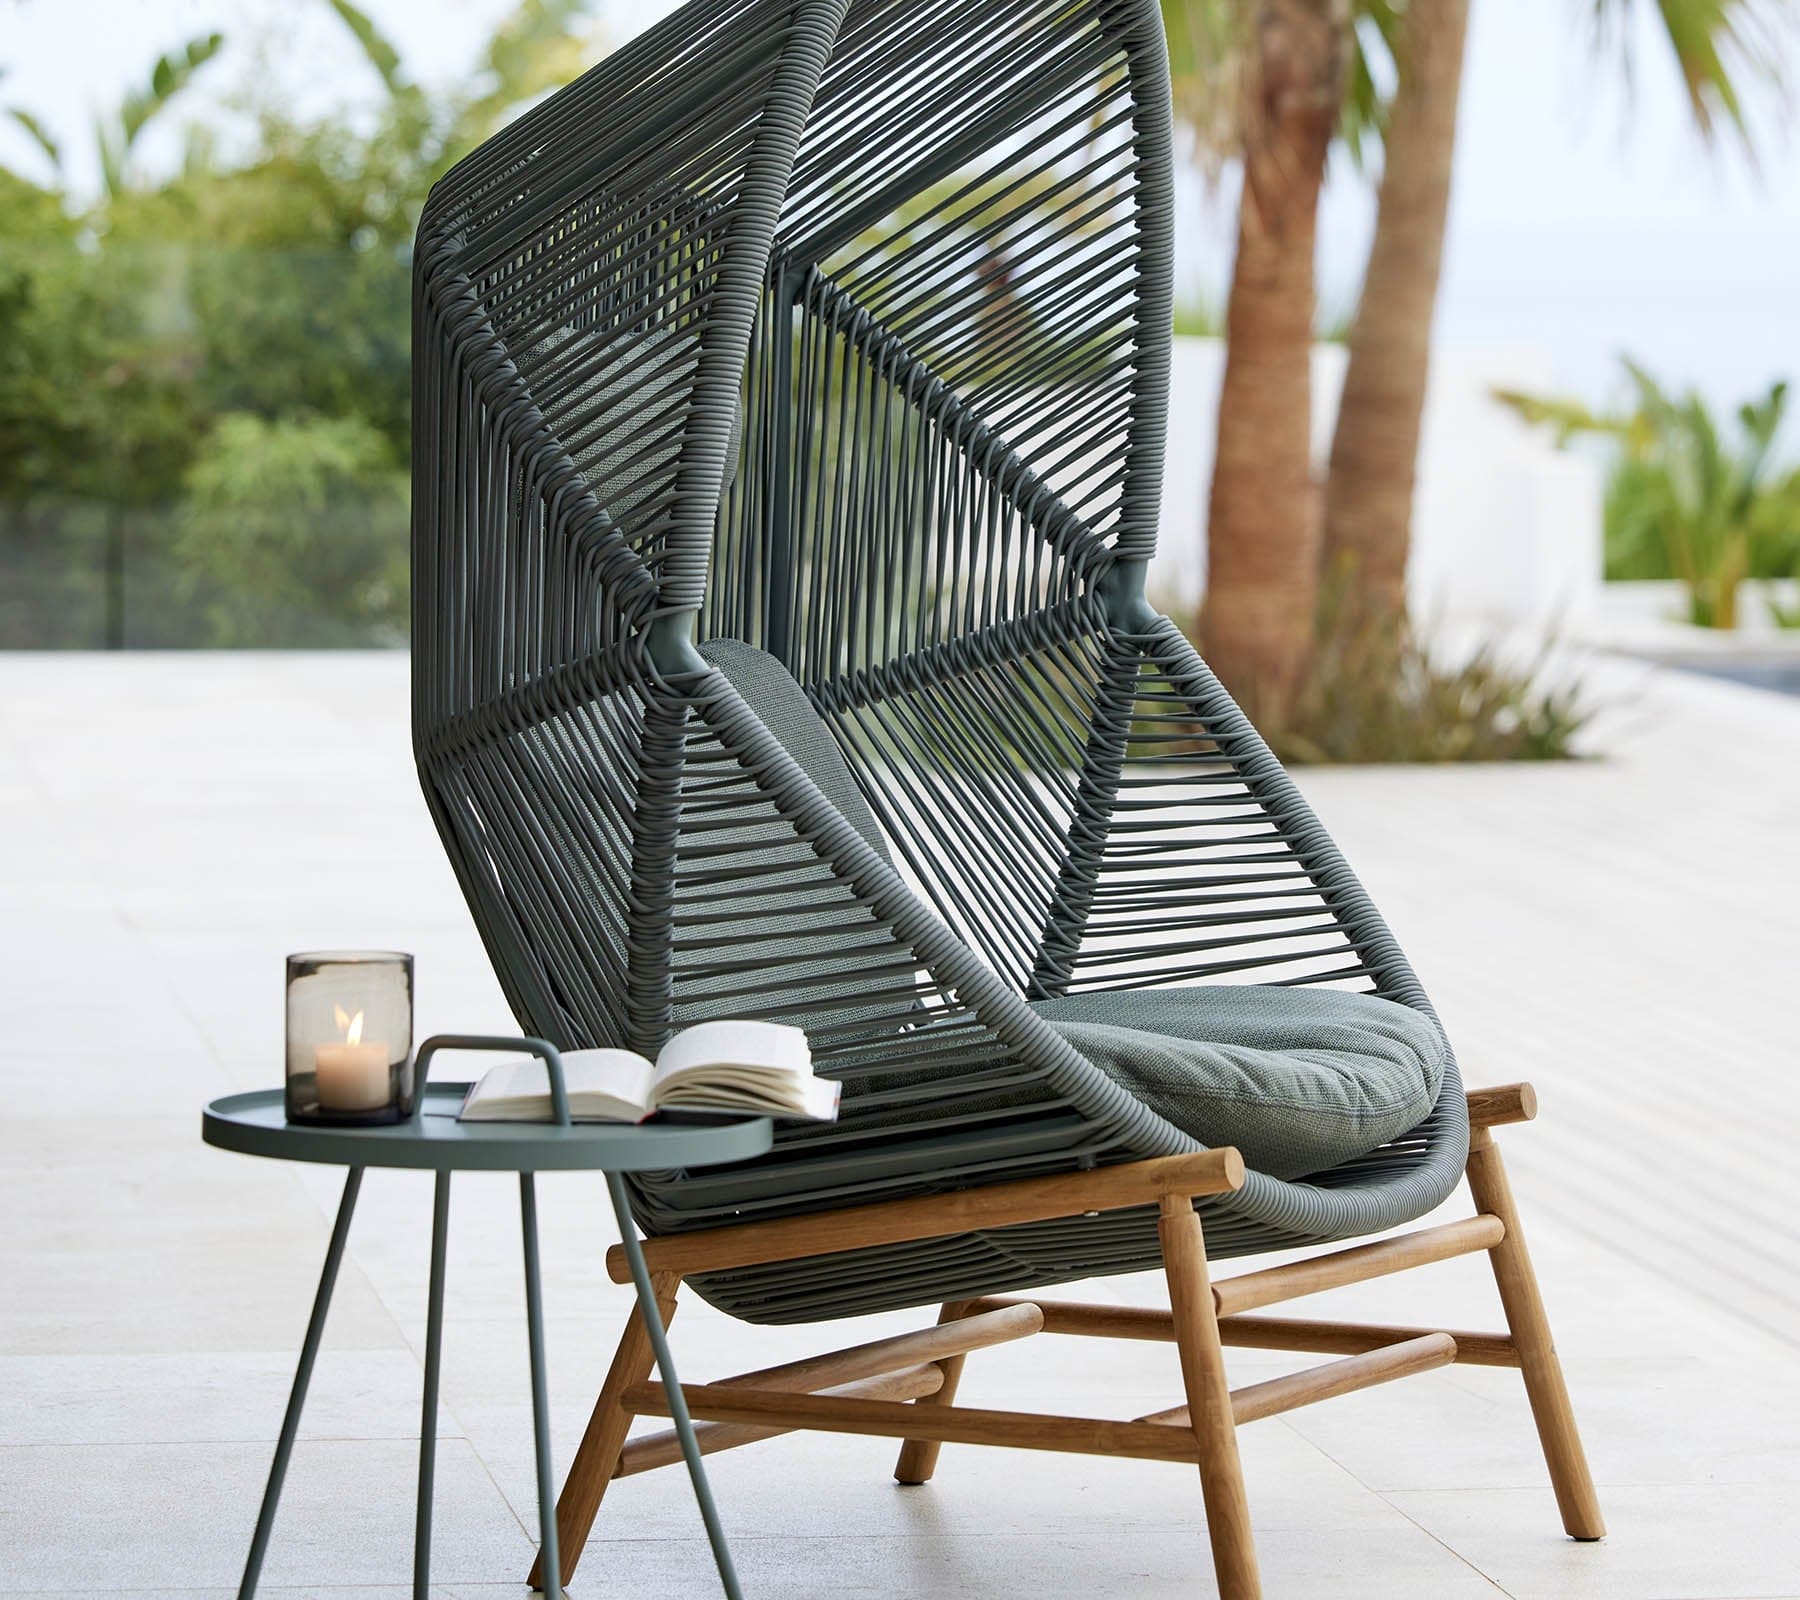 oxhill's Hive Outdoor Hanging Chair Dusty Green Frame lifestyle image with round side table at the side with candle inside the glass and a book on top